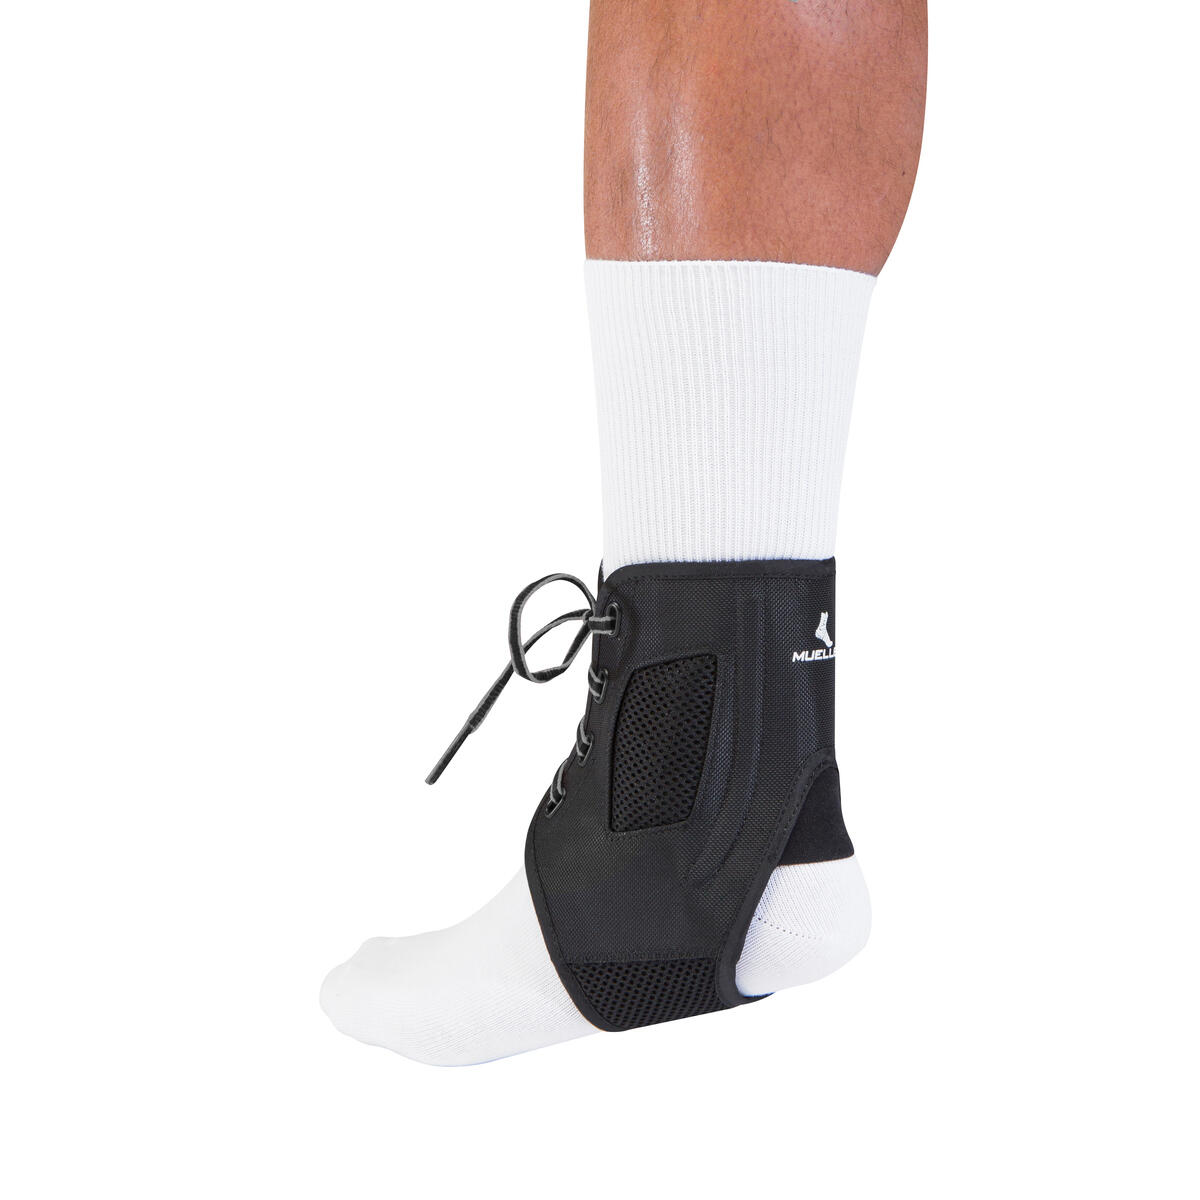 Mueller Ankle Brace Adjust to Fit Laced Firm Support - Small 3/3